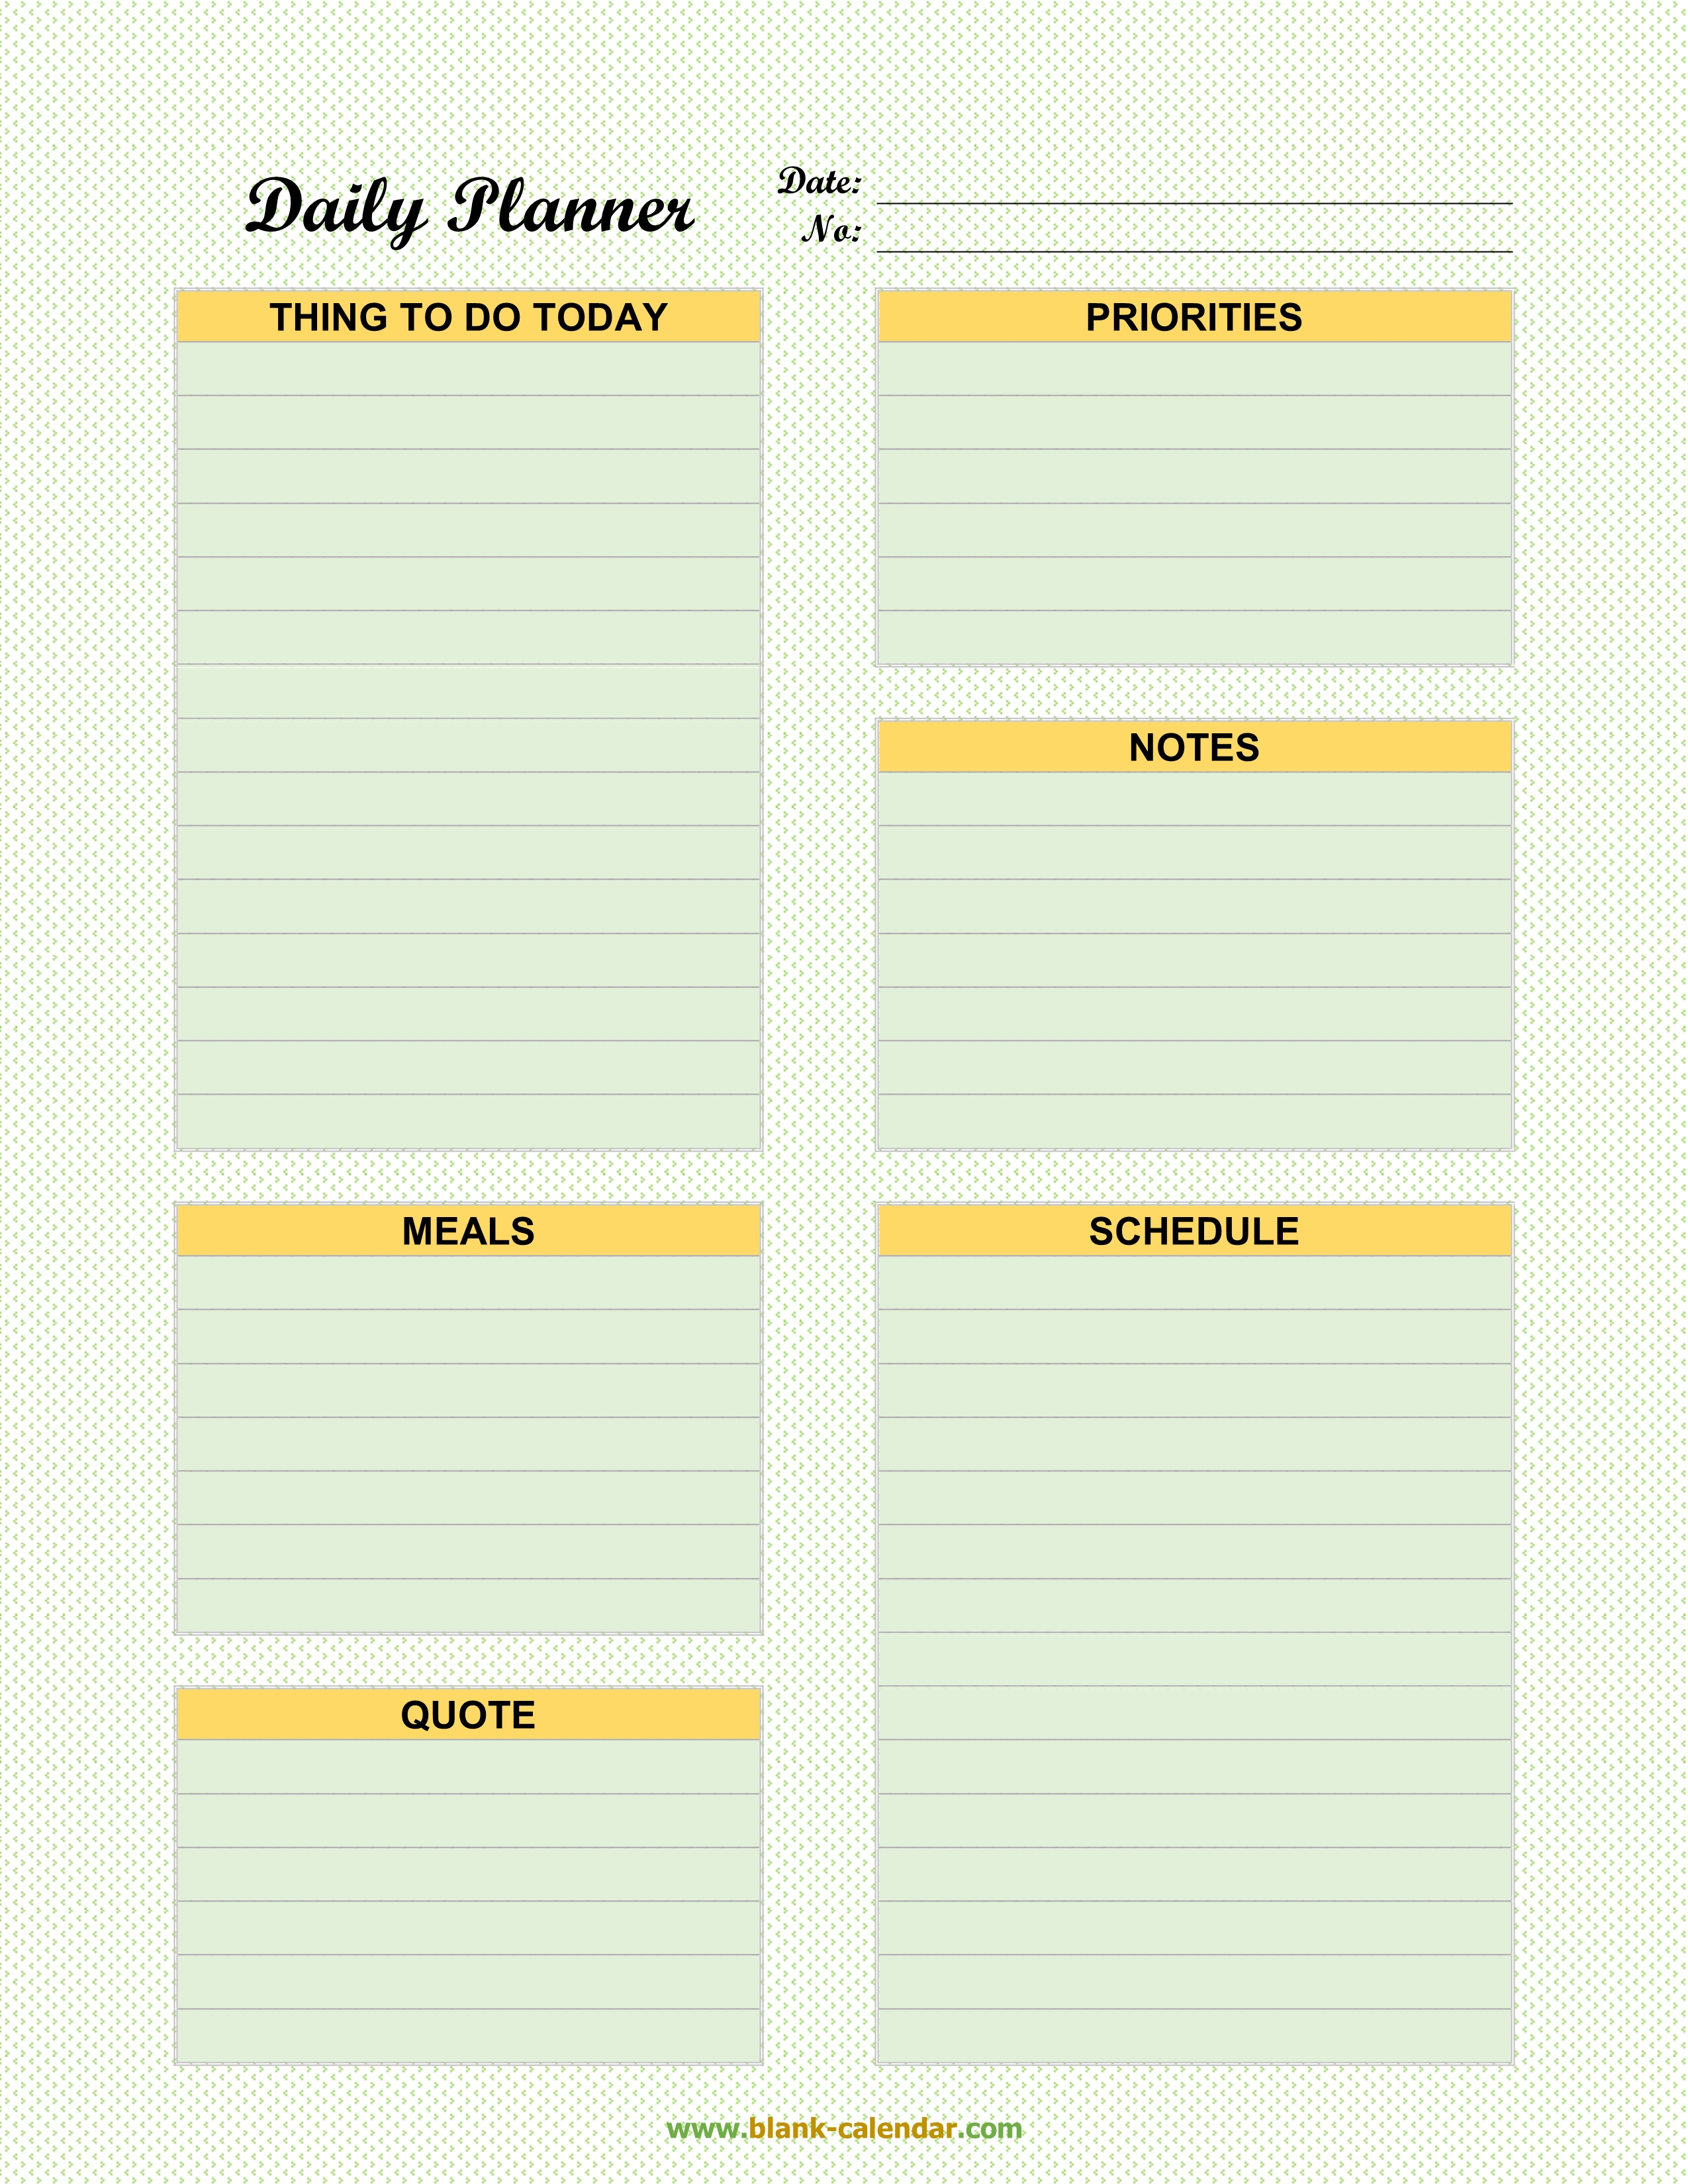 Daily Planner Templates (WORD EXCEL PDF)